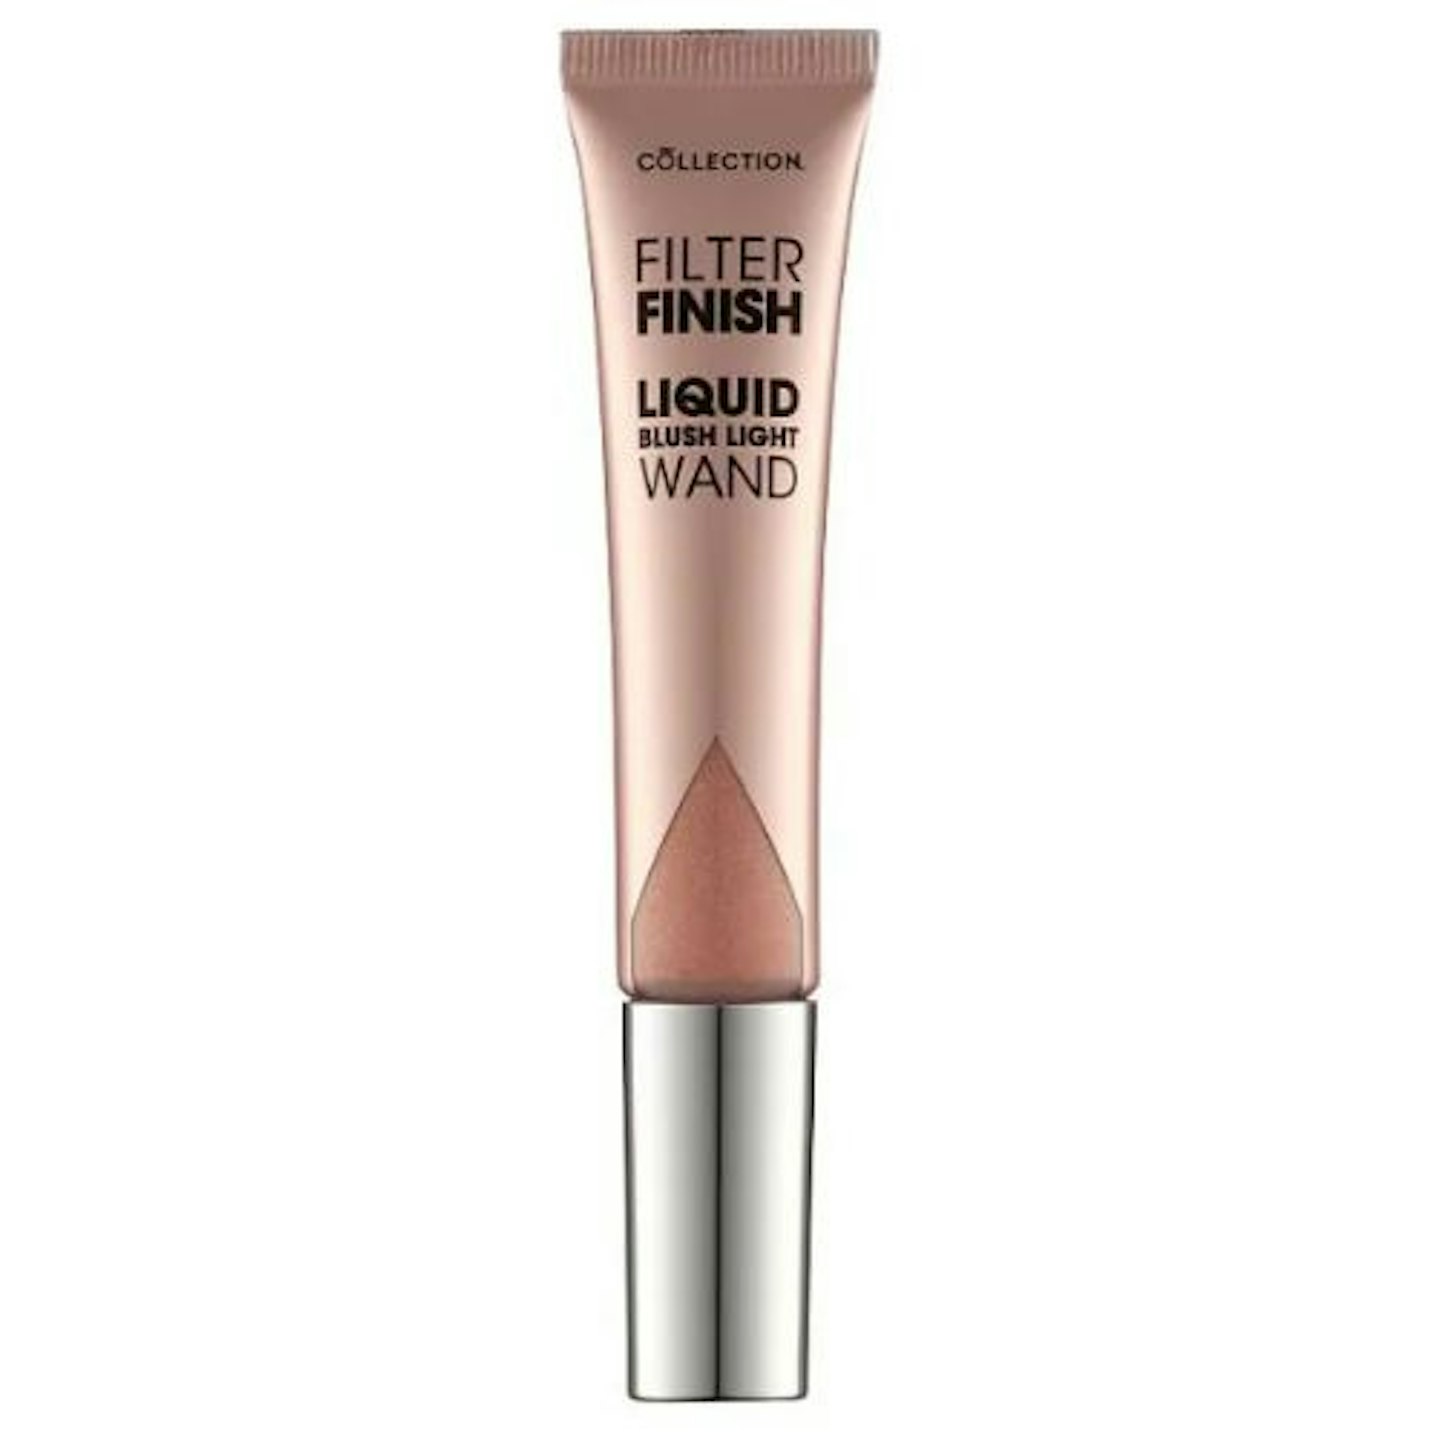 Collection Filter Finish Liquid Blush Light Wand Sweet Nothings